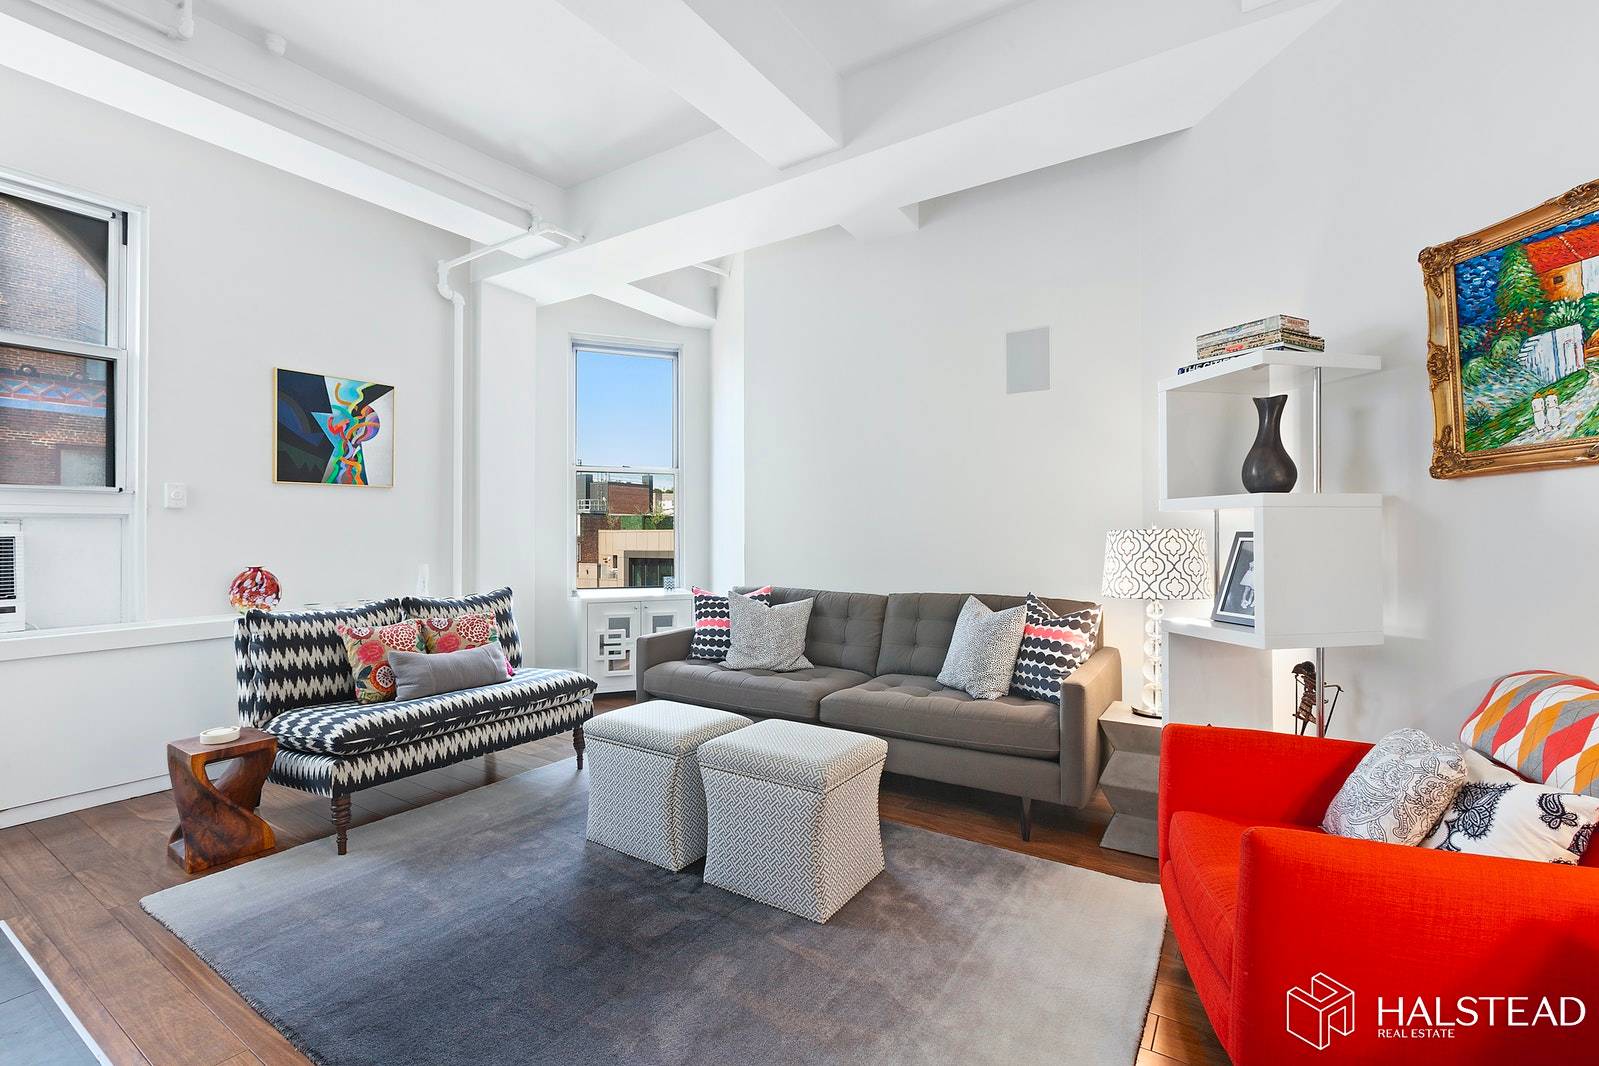 Your prewar loft like renovated masterpiece featuring 11 ft ceilings, the rare and coveted wood burning fireplace only about 7 total in the building, chestnut hardwood floors and exquisite Chef's ...